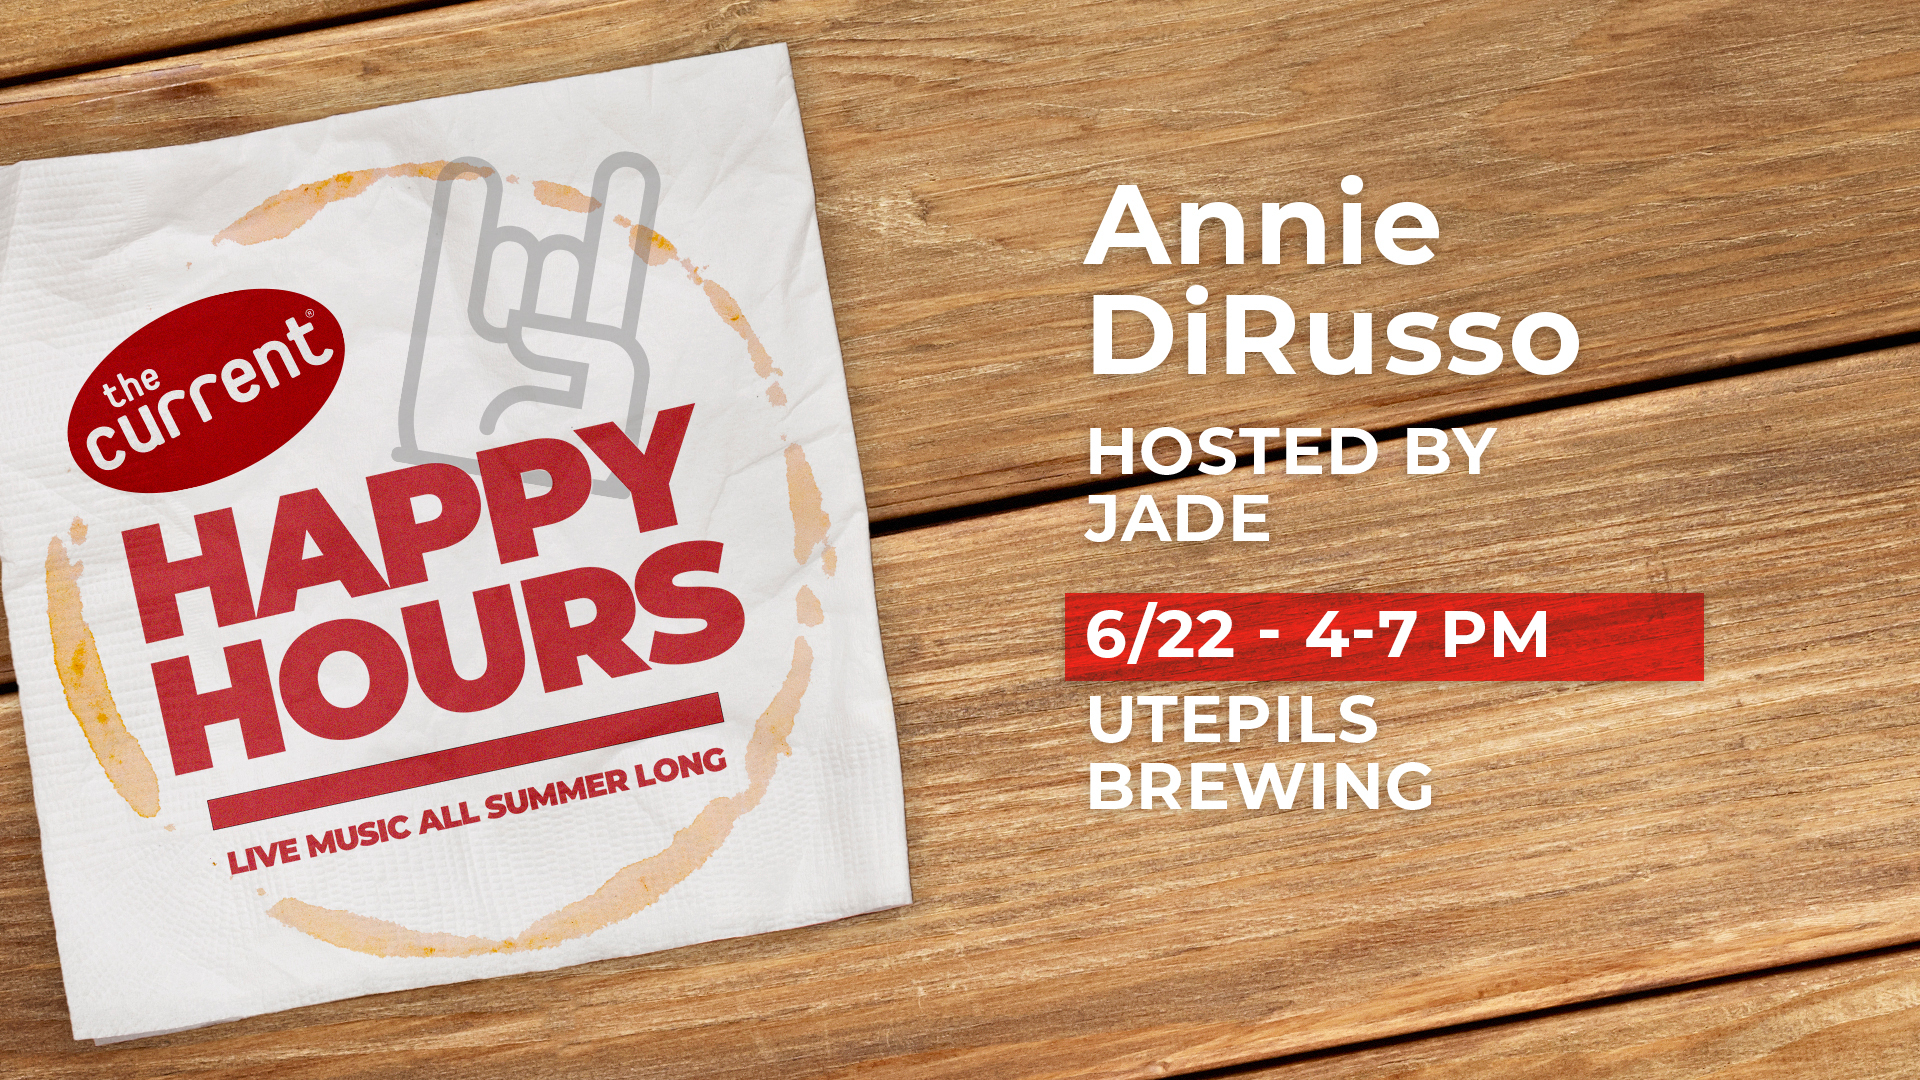 Annie DiRusso Hosted by Jade 6-22 4-7 PM